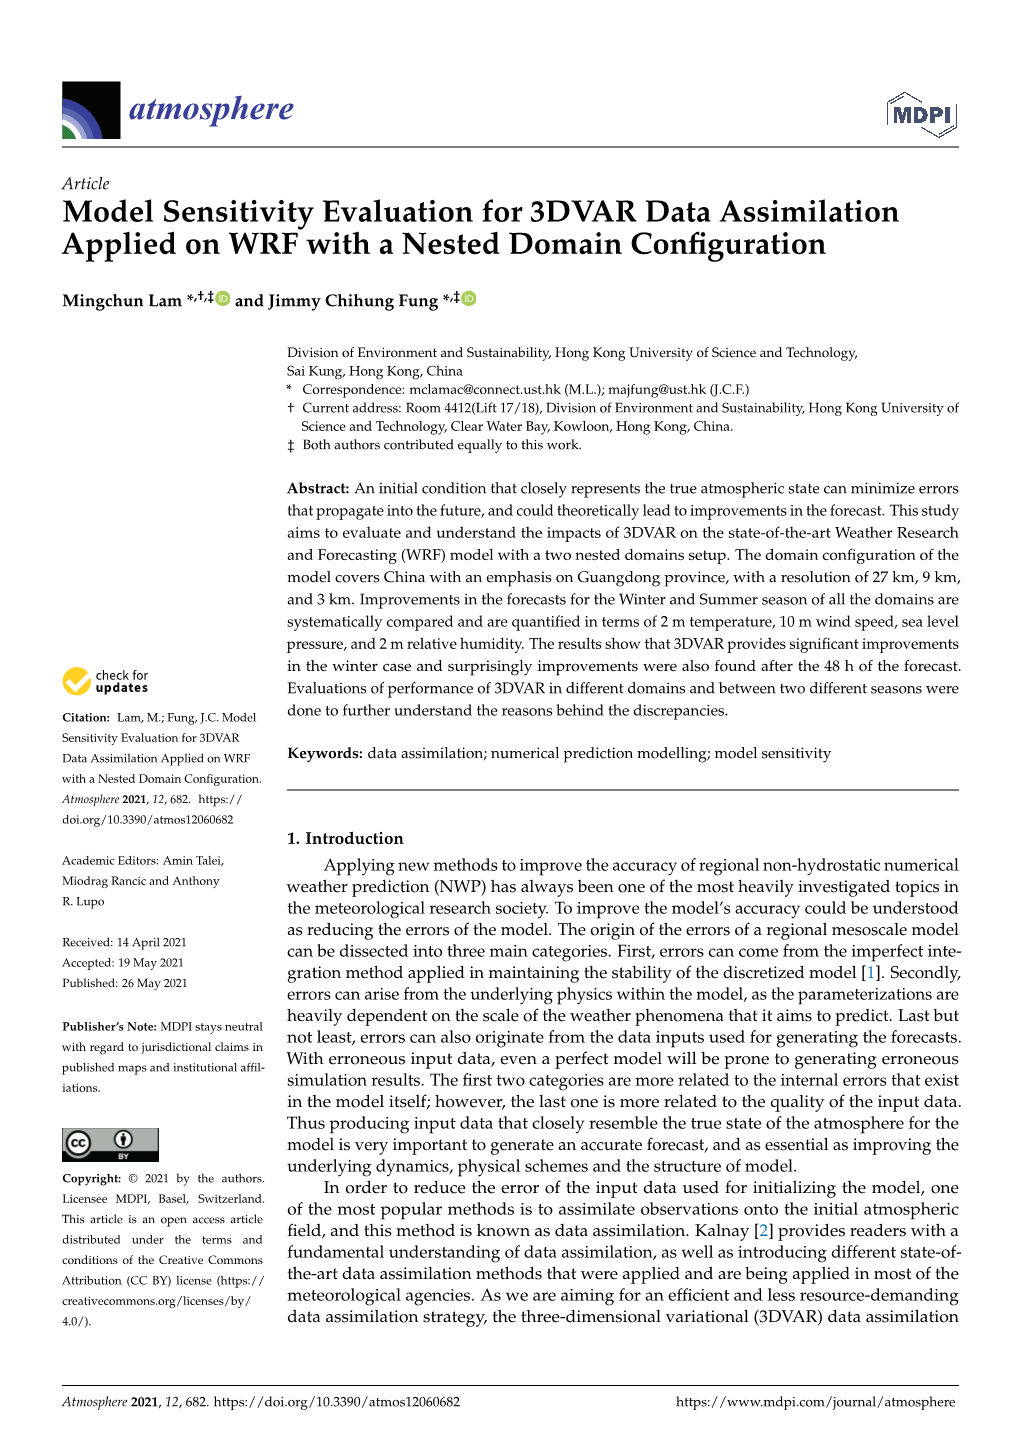 Model Sensitivity Evaluation for 3DVAR Data Assimilation Applied on WRF with a Nested Domain Conﬁguration